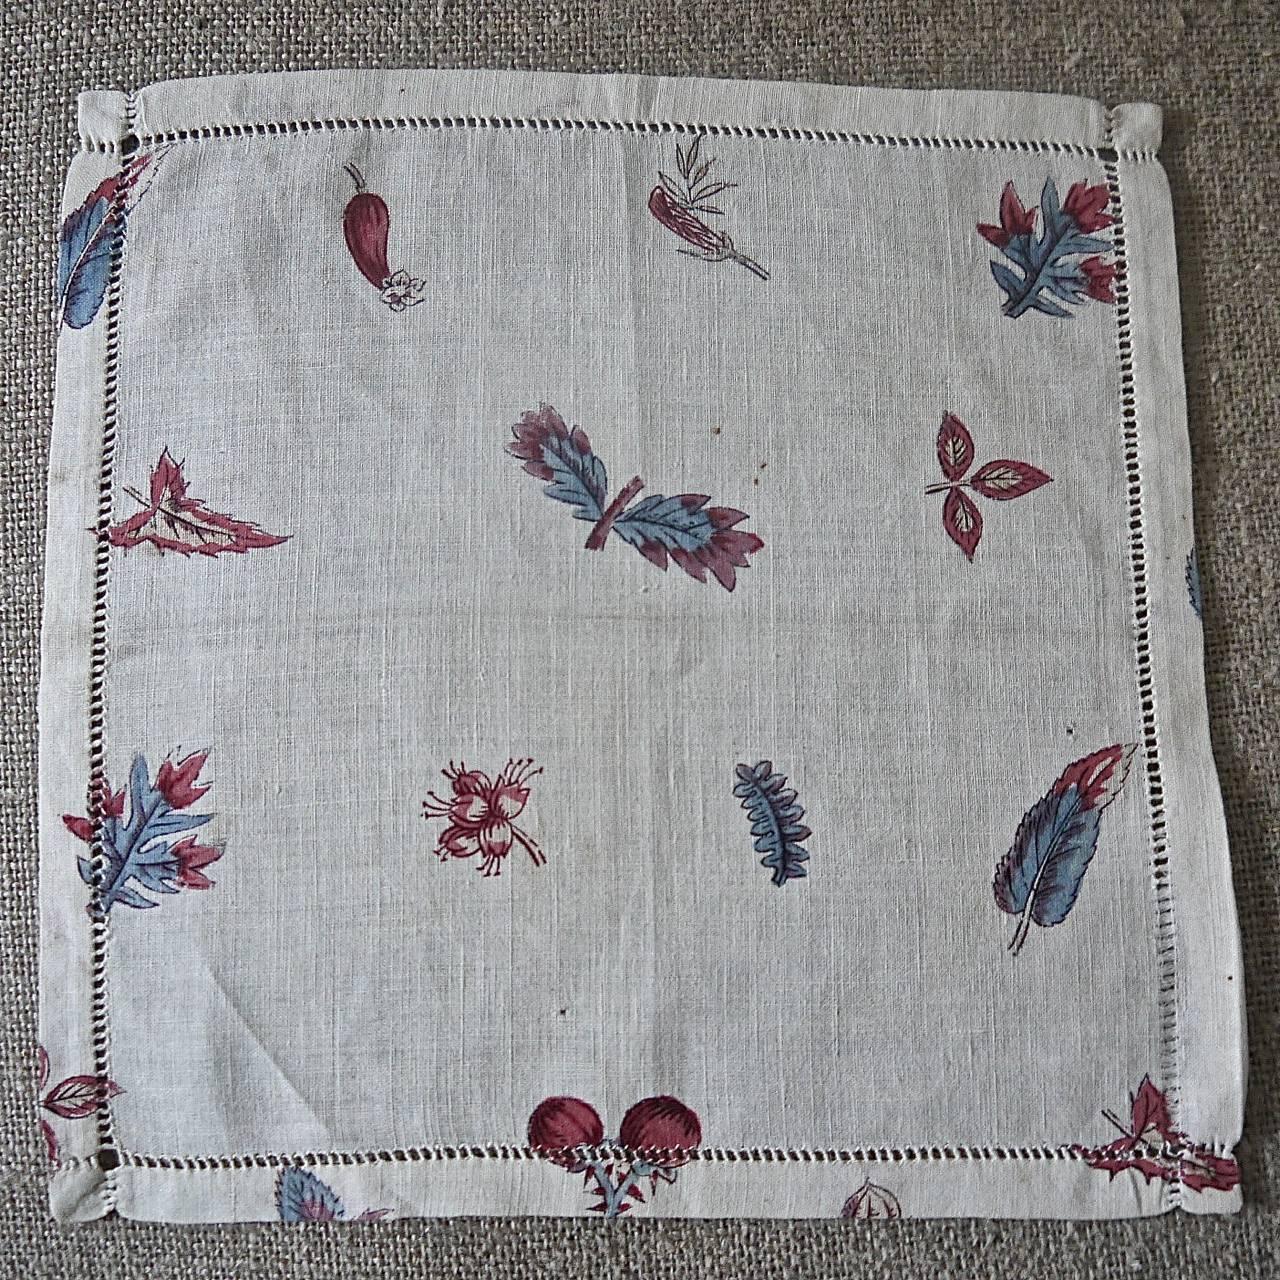 French 18th century small mouchoir or handkerchief block printed with leaves and flower buds in very pretty blue, raspberry red and pale yellow colors. Delightful piece.